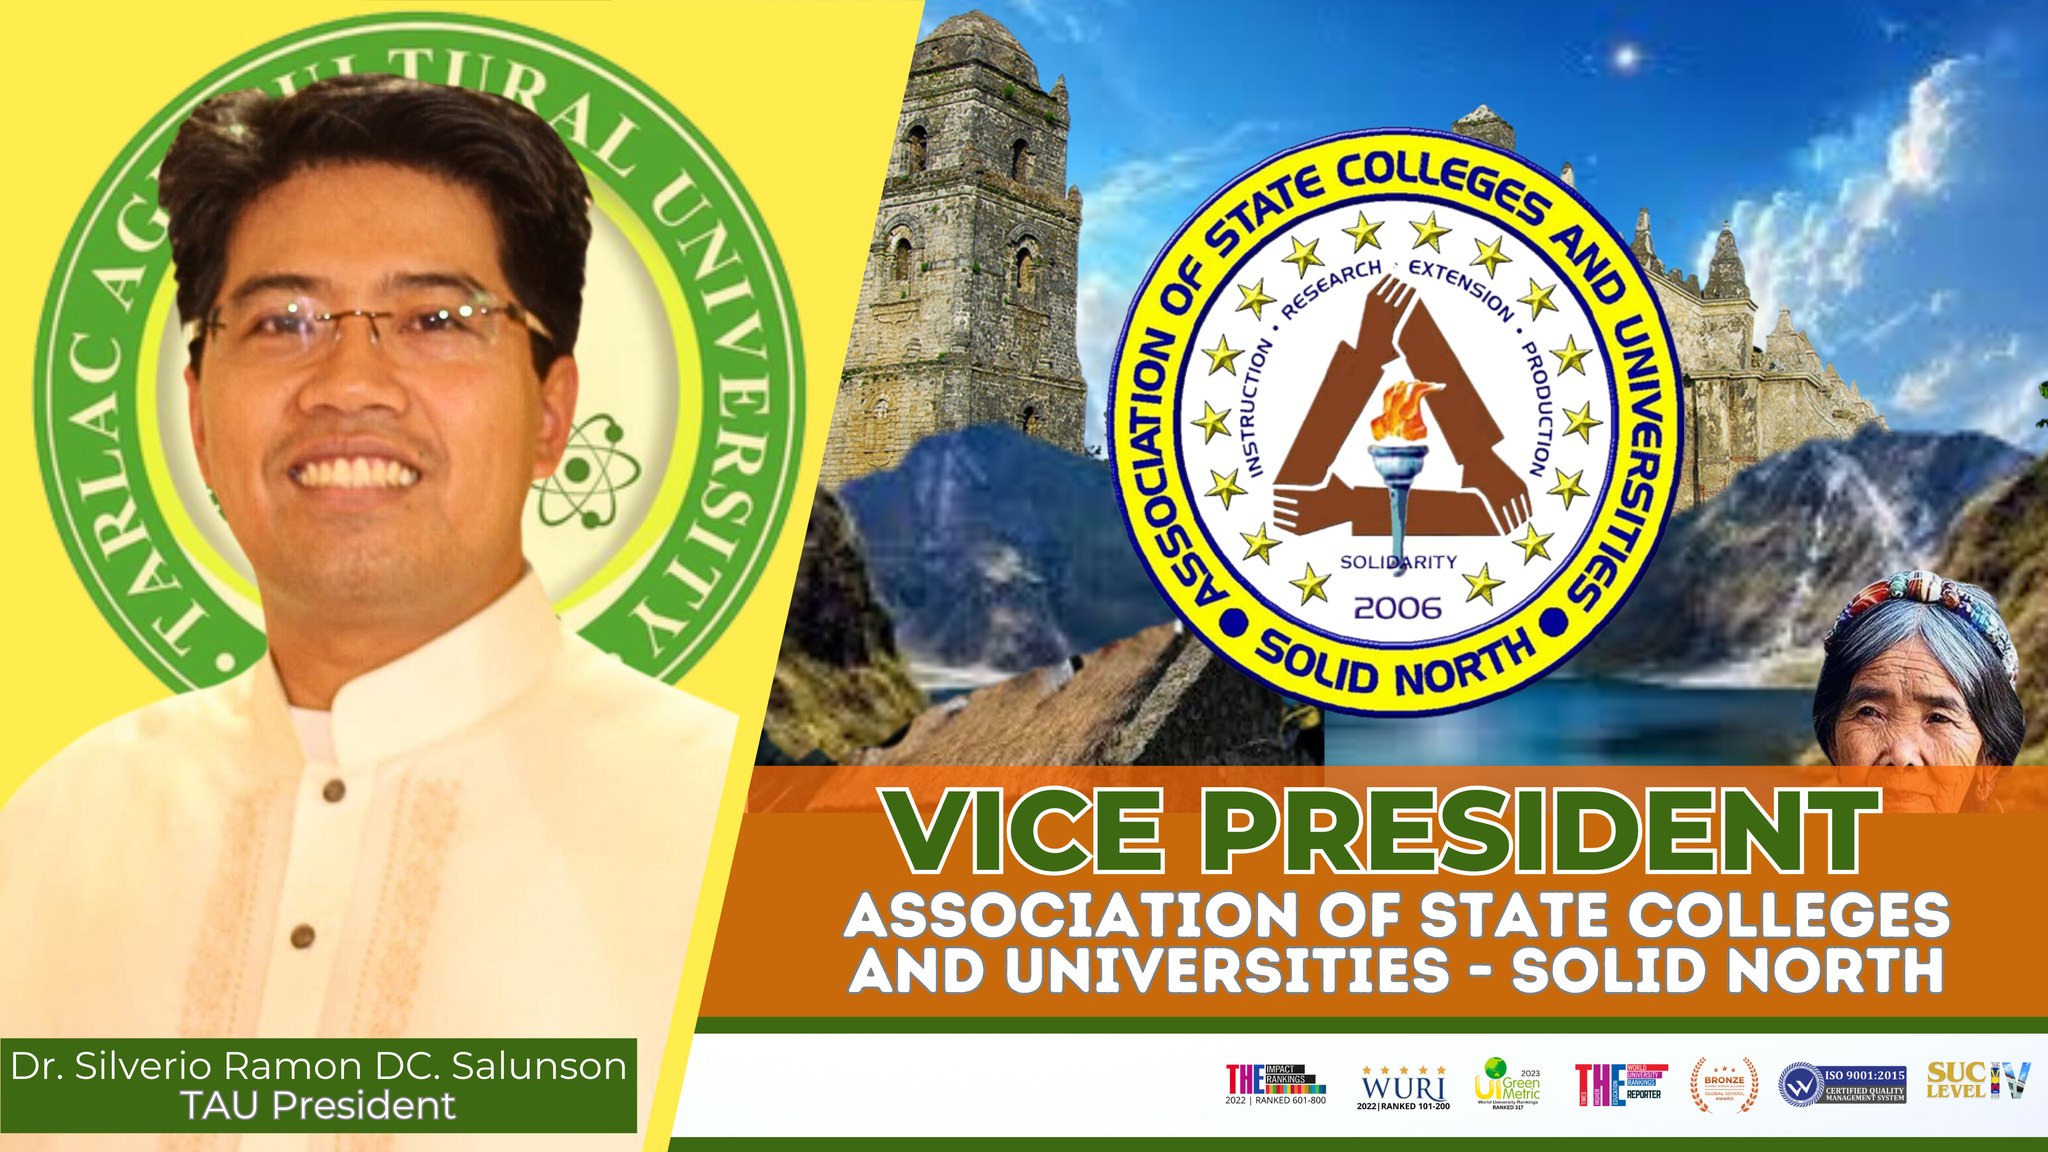 After taking his oath of office at the Presidents’ Night yesterday, 2 July, TAU President Dr. Silverio Ramon DC. Salunson is now the new Vice President of the Association of State Colleges and Universities - Solid North (ASCU-SN)